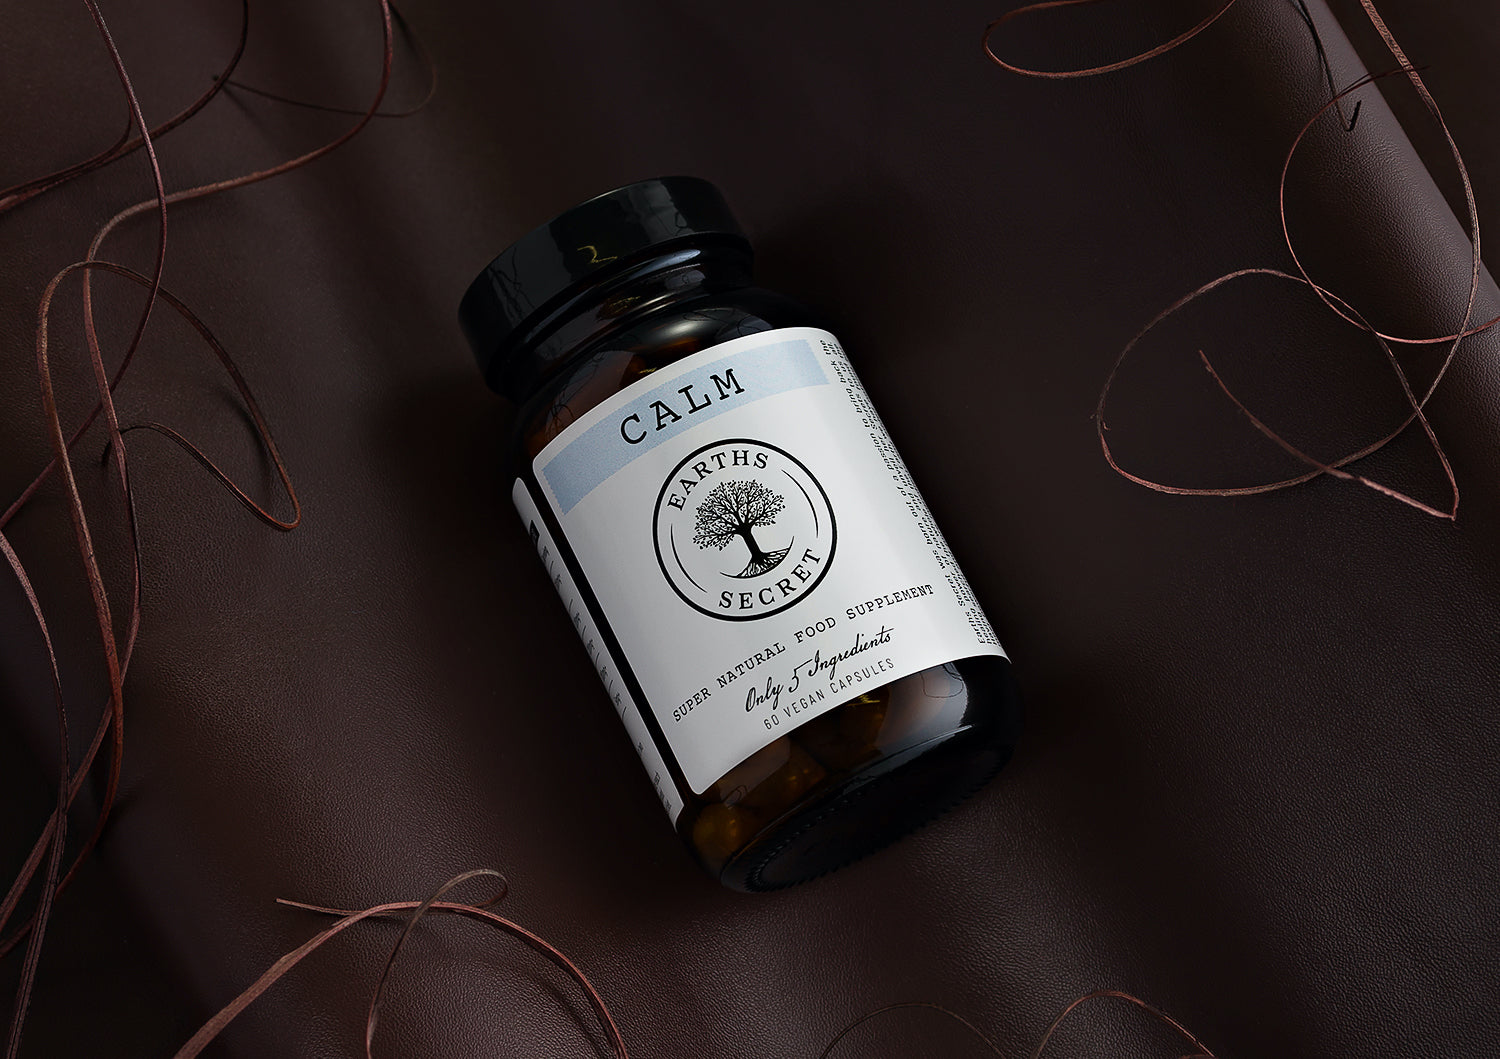 Calm is a natural anxiety supplement designed to reduce anxiety and stress, using only natural herbal ingredients.